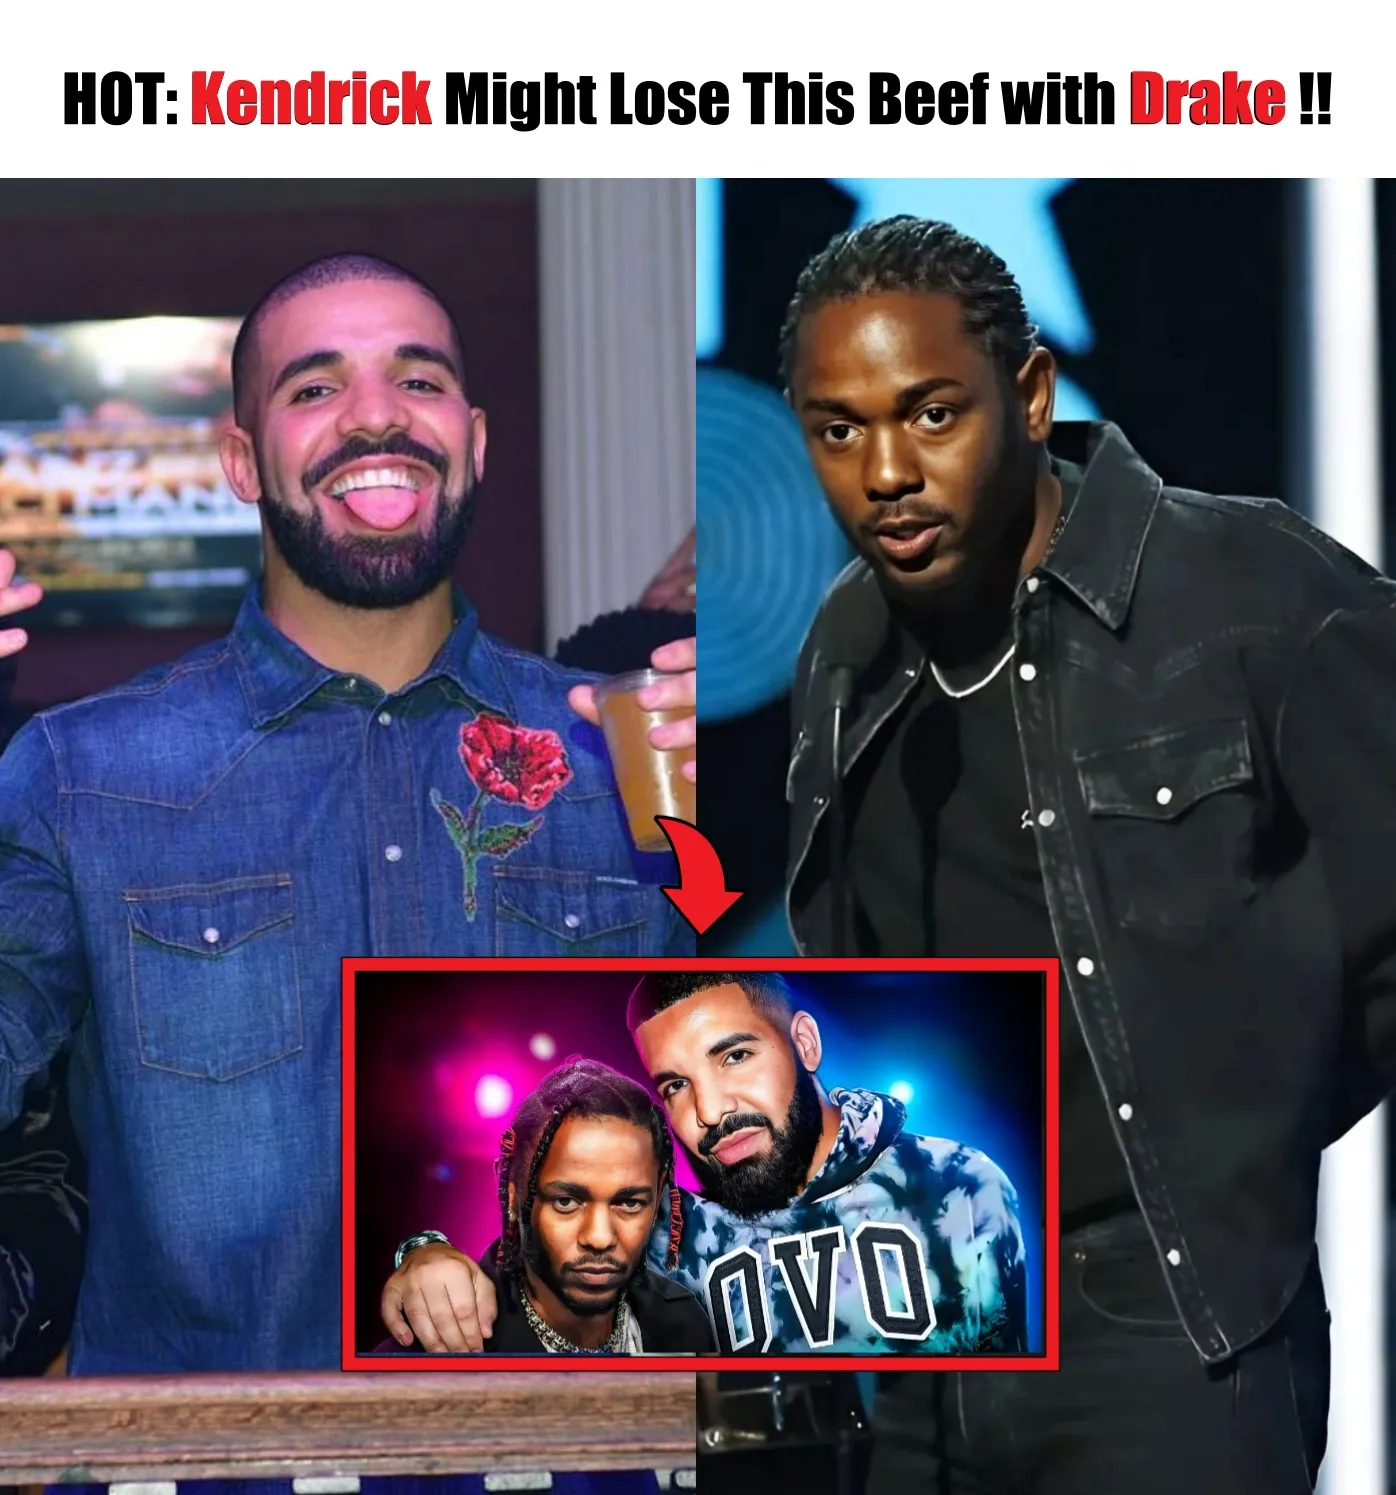 Cover Image for Kendrick Might Lose This Beef with Drake !!